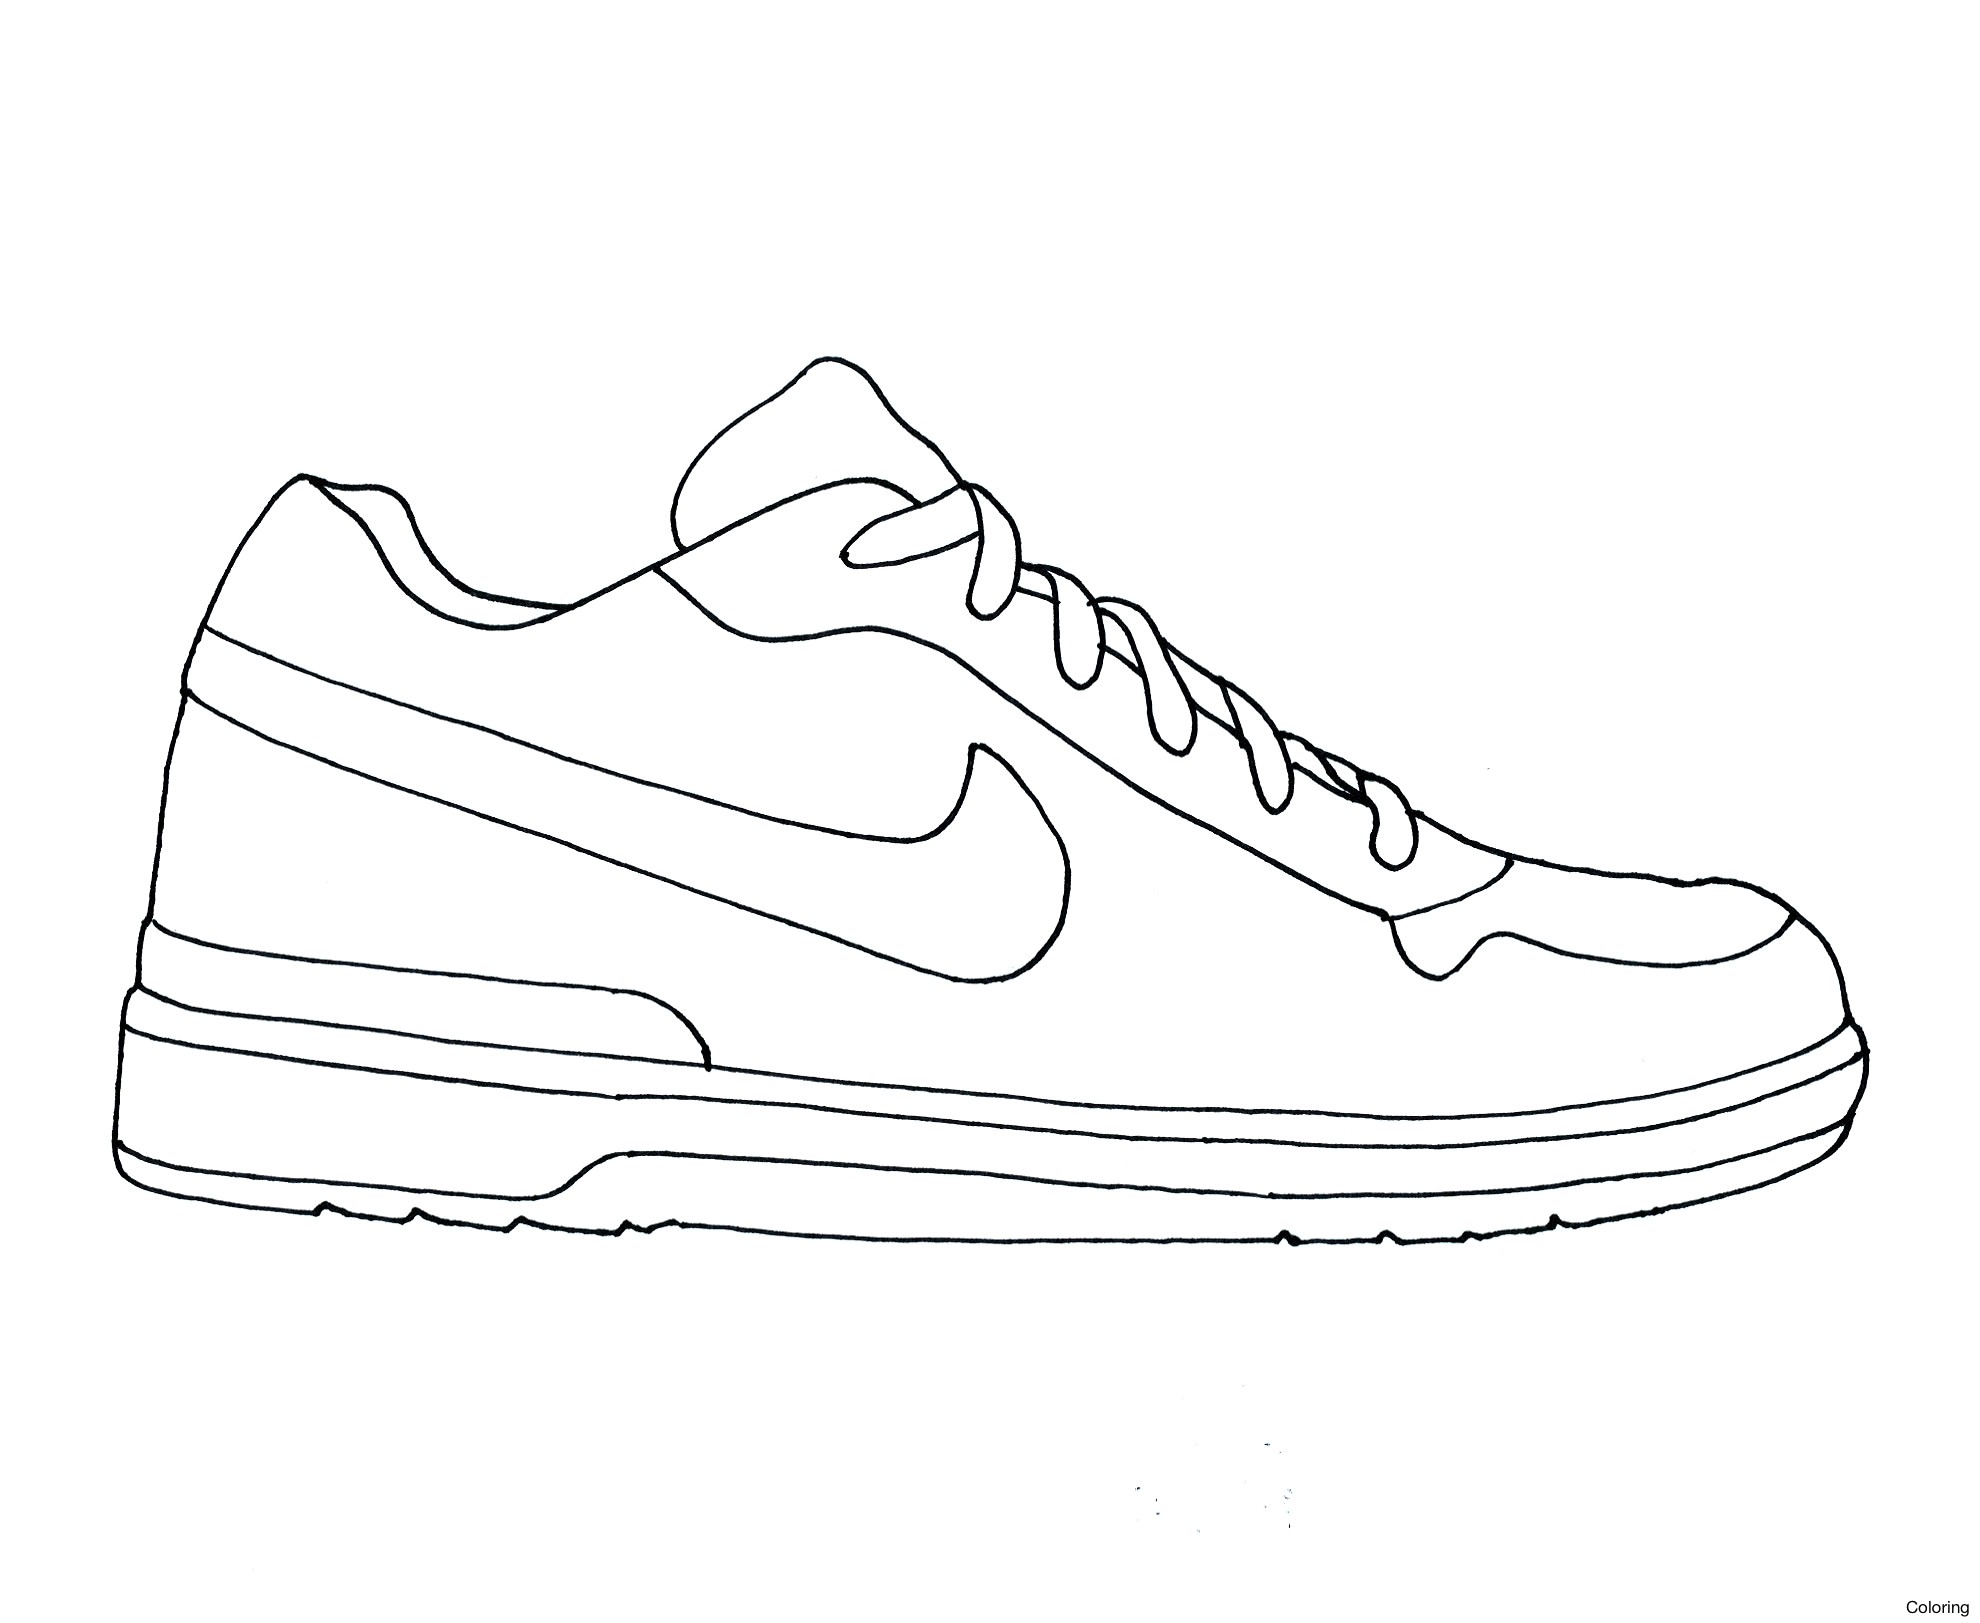 Coloring Pages : Tennis Shoe Coloring Page Free Printable Running ...